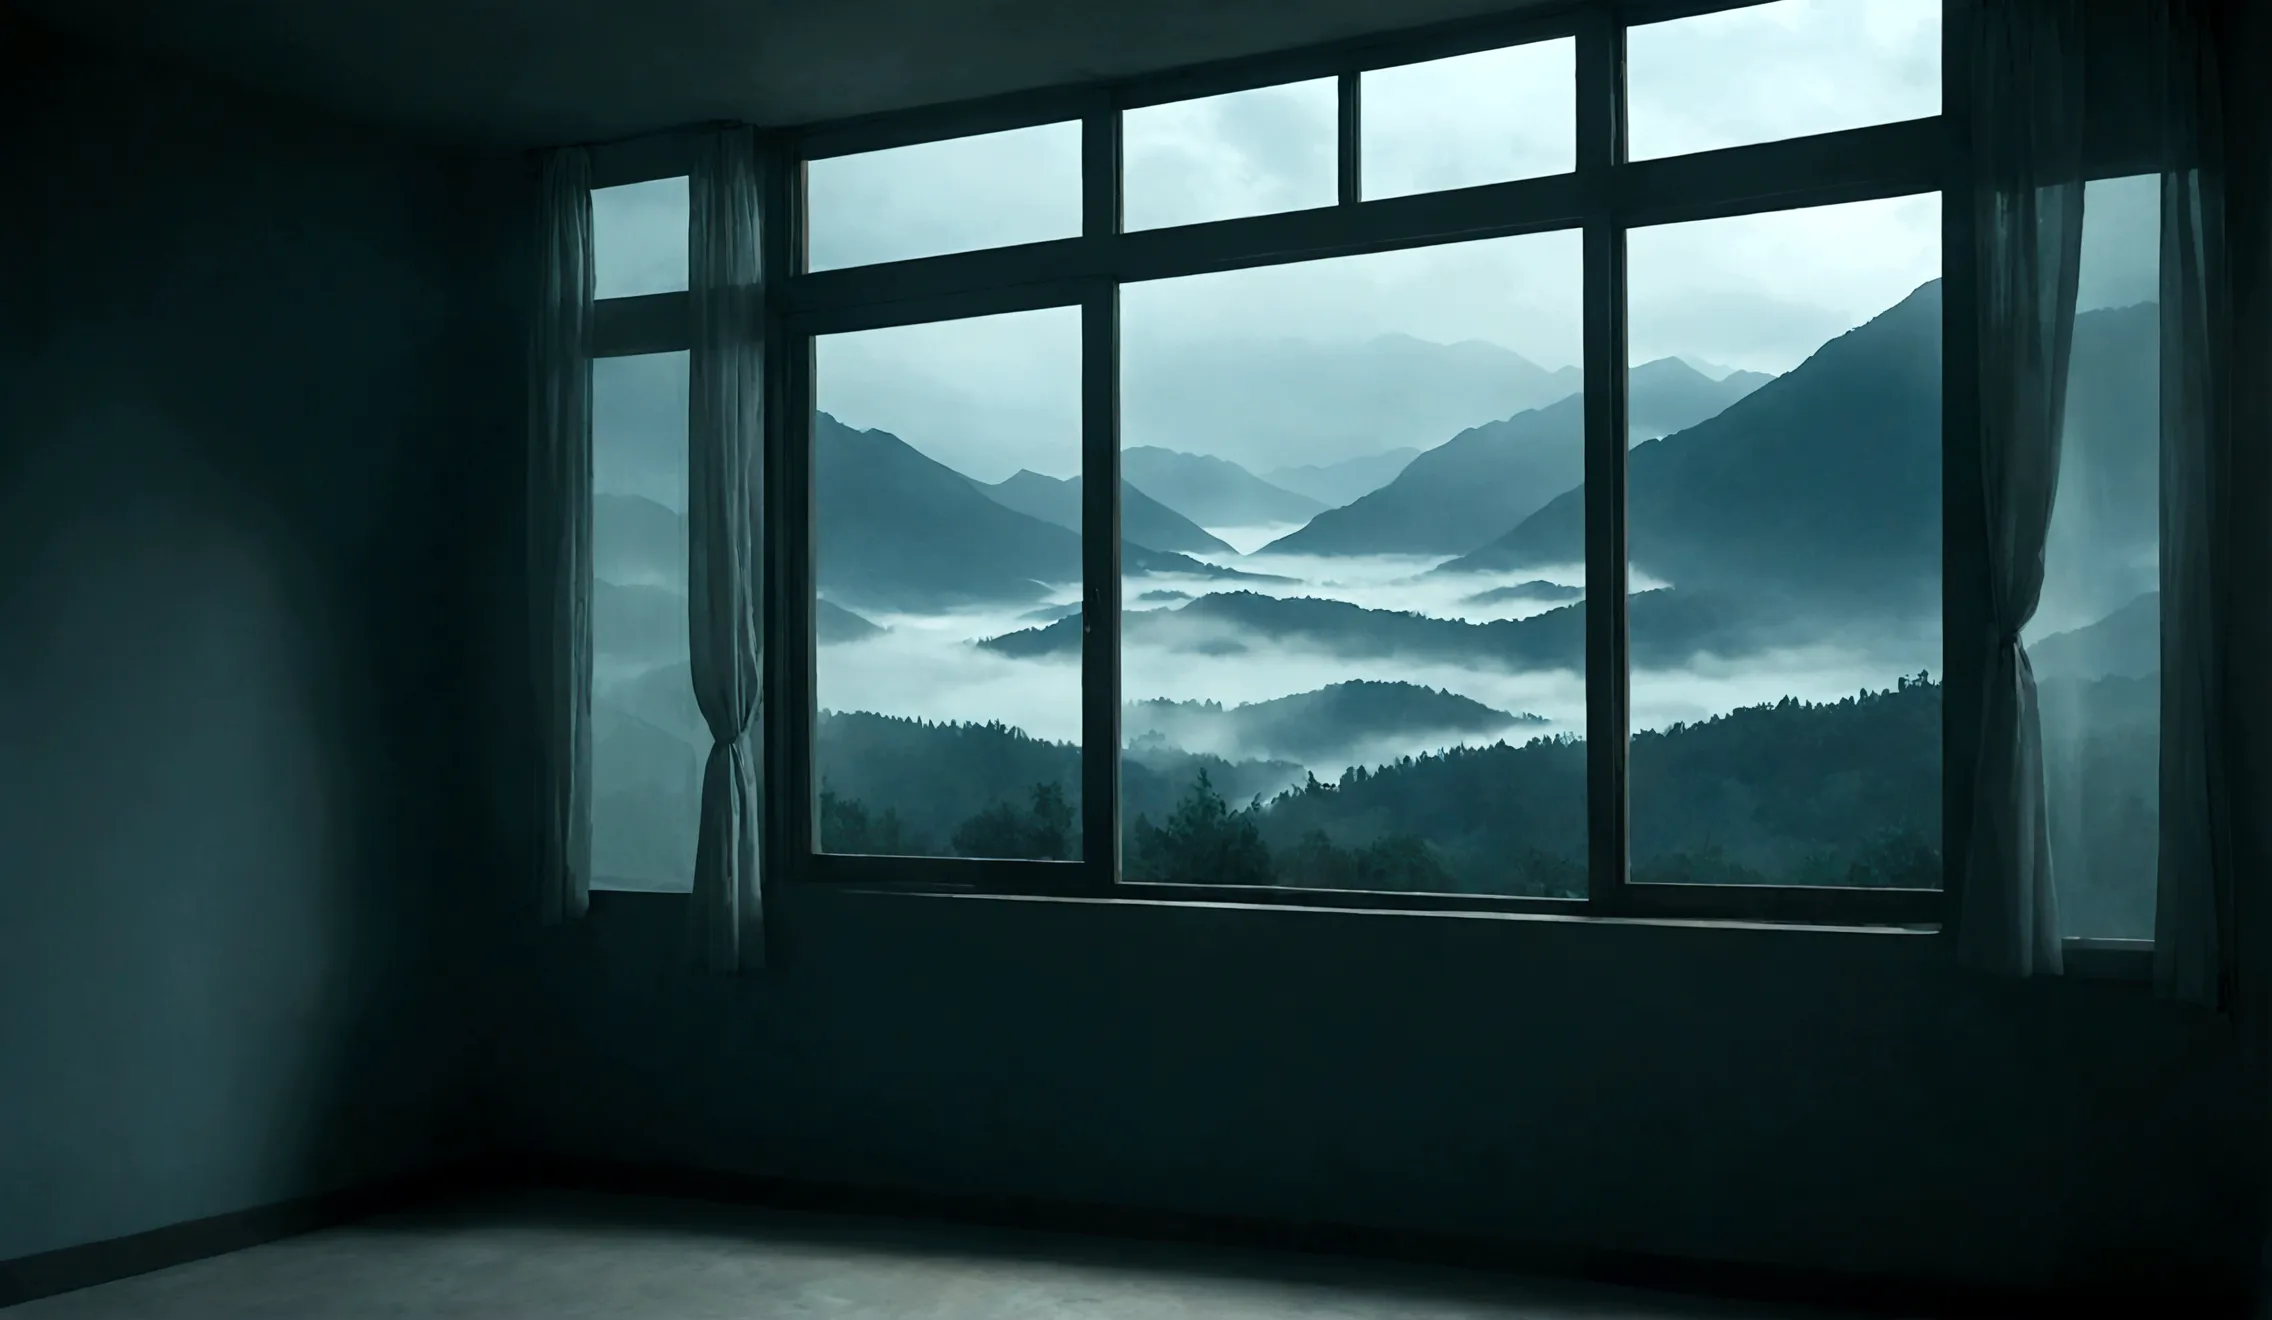 Create an illustration featuring a window with a view of distant mountains shrouded in mist, maintaining the same style, color p...